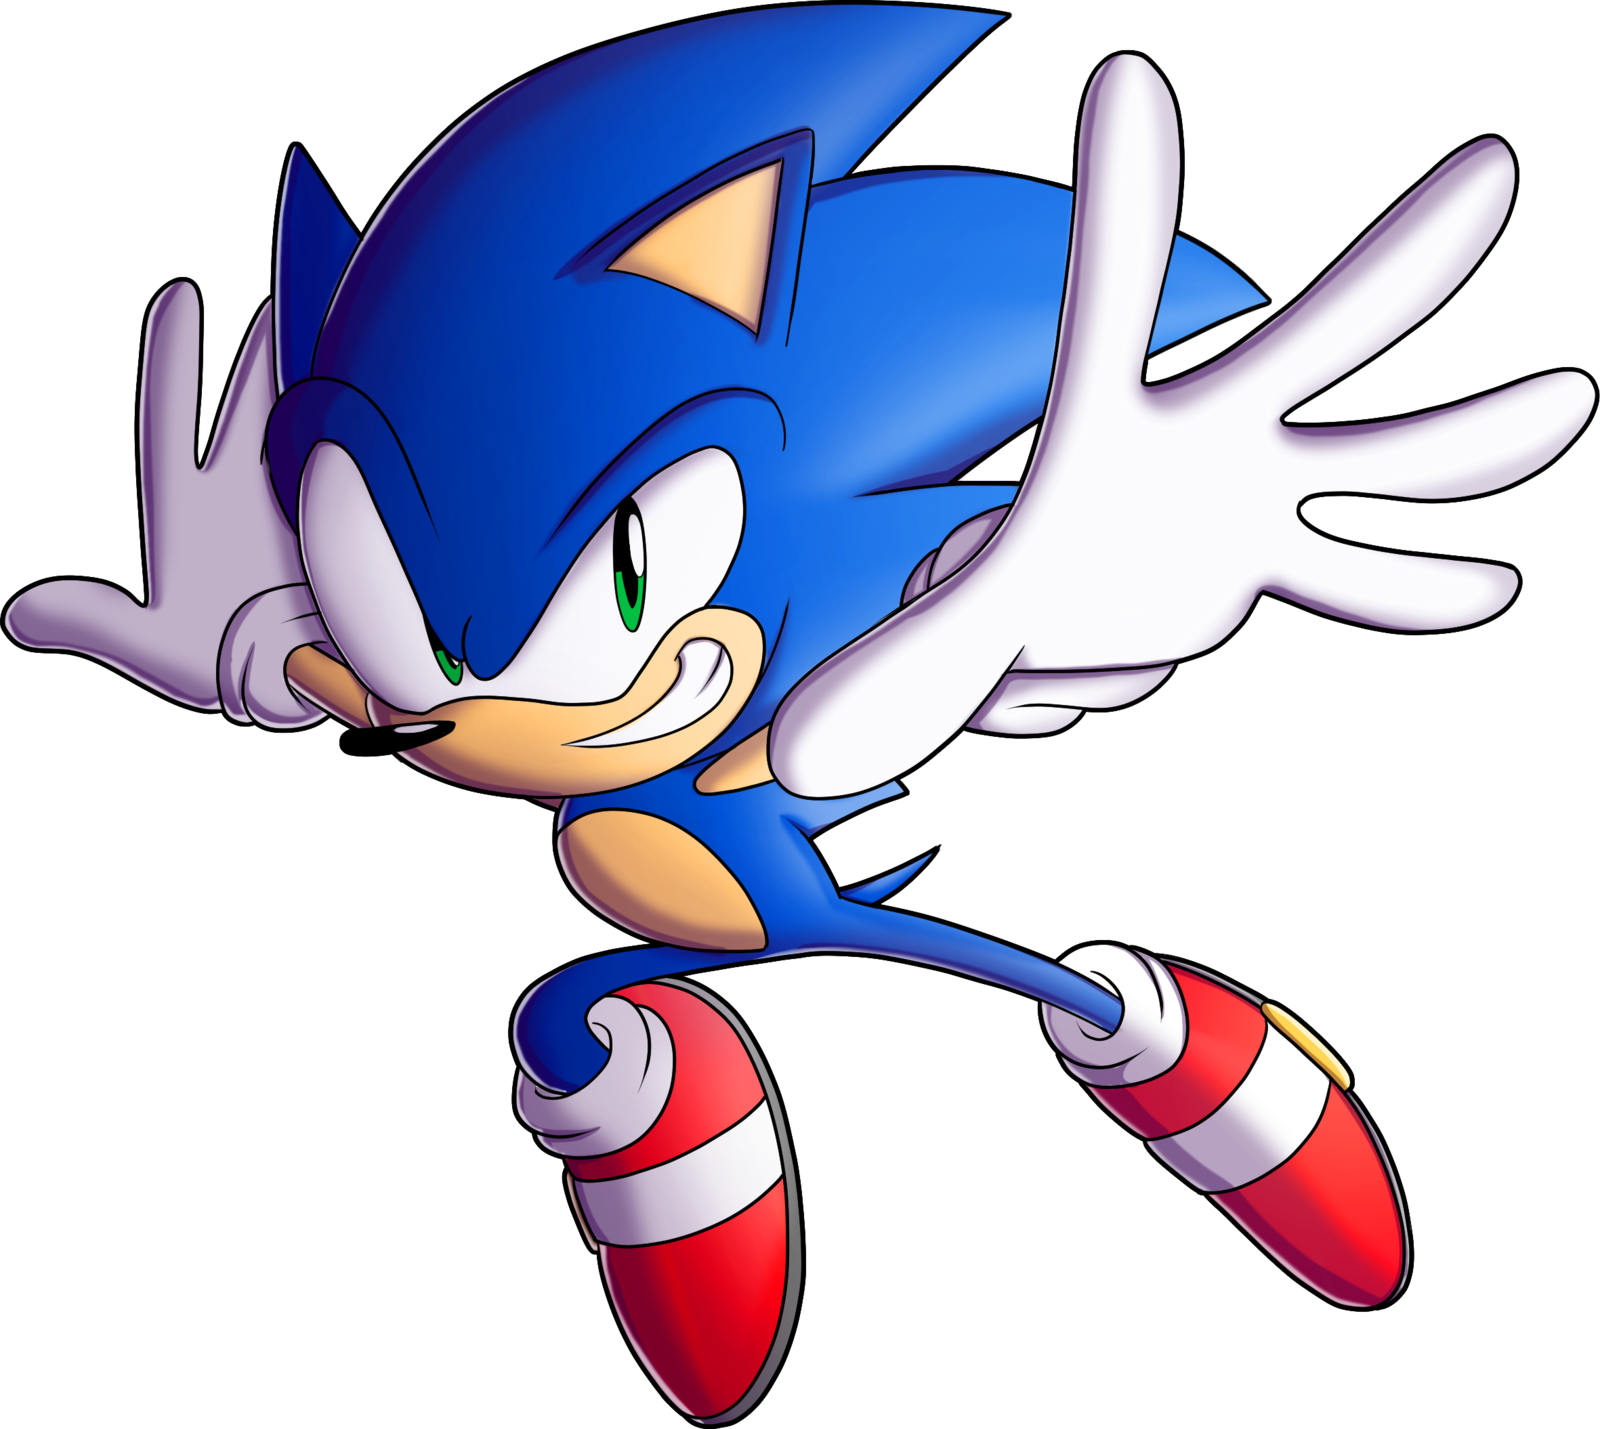 Download Sonic Vertebrate Mania Forces The Cartoon Hedgehog HQ PNG